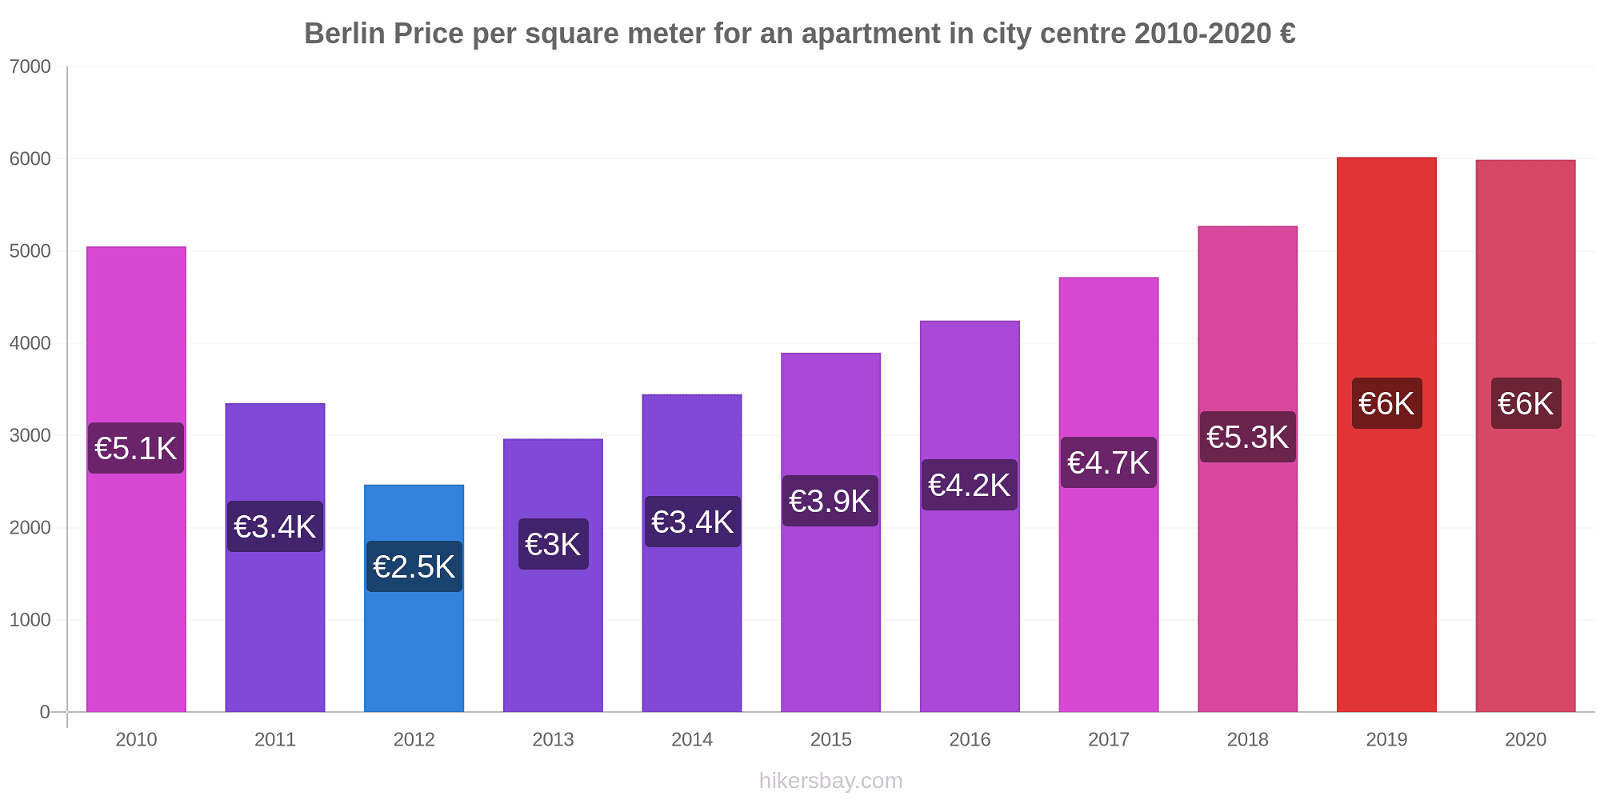 Berlin price changes Price per square meter for an apartment in city centre hikersbay.com